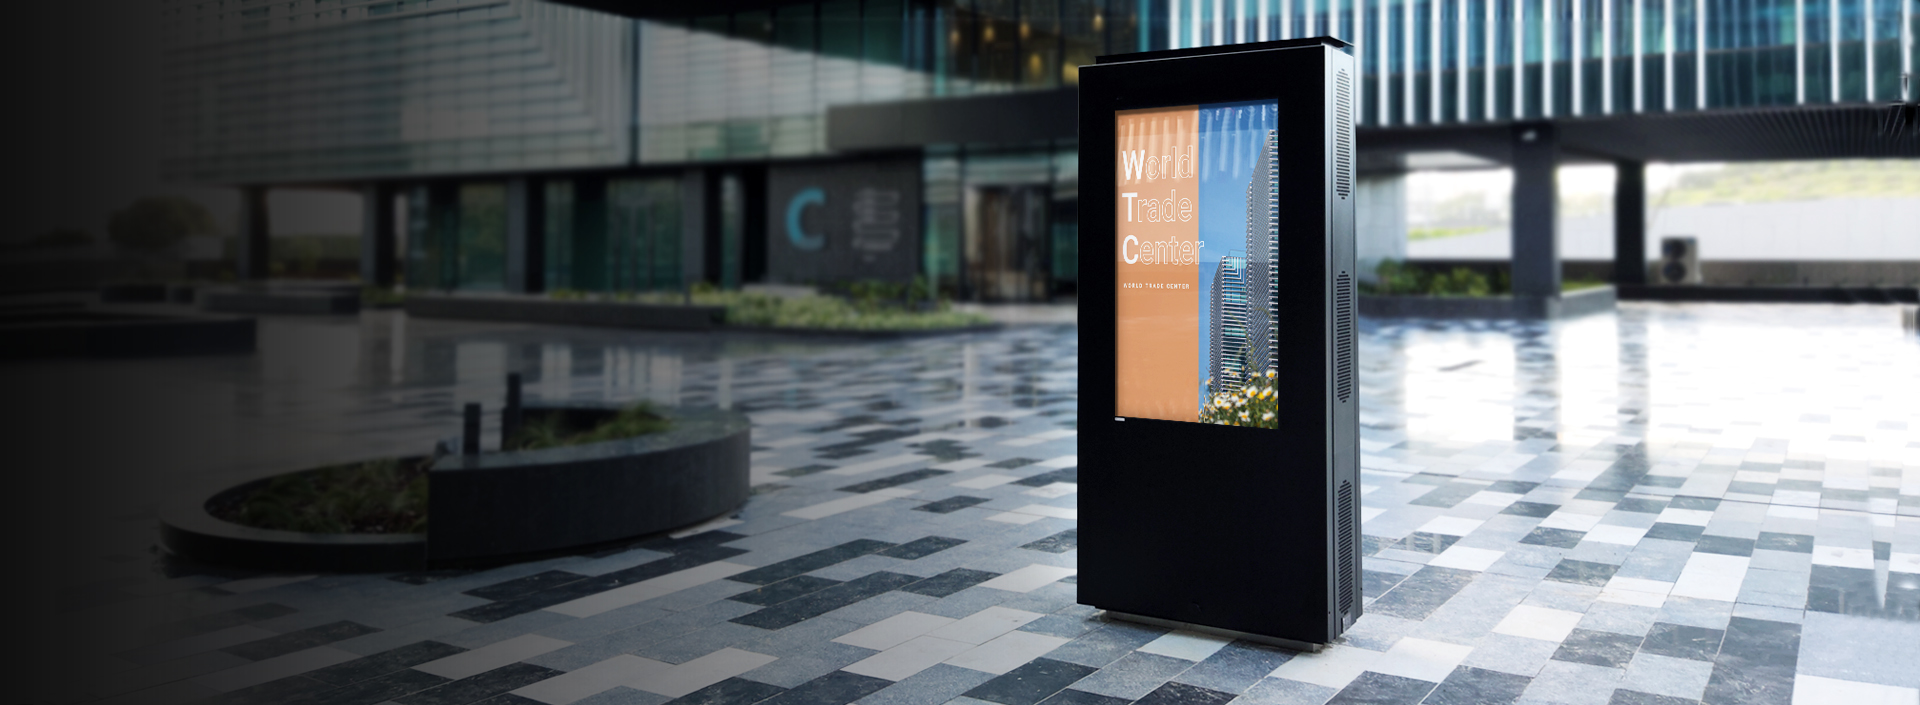 <span class='text-highlight'>WORLD TRADE CENTER</span> uses digital billboards by  <span class='text-highlight'>PARTTEAM & OEMKIOSKS</span>